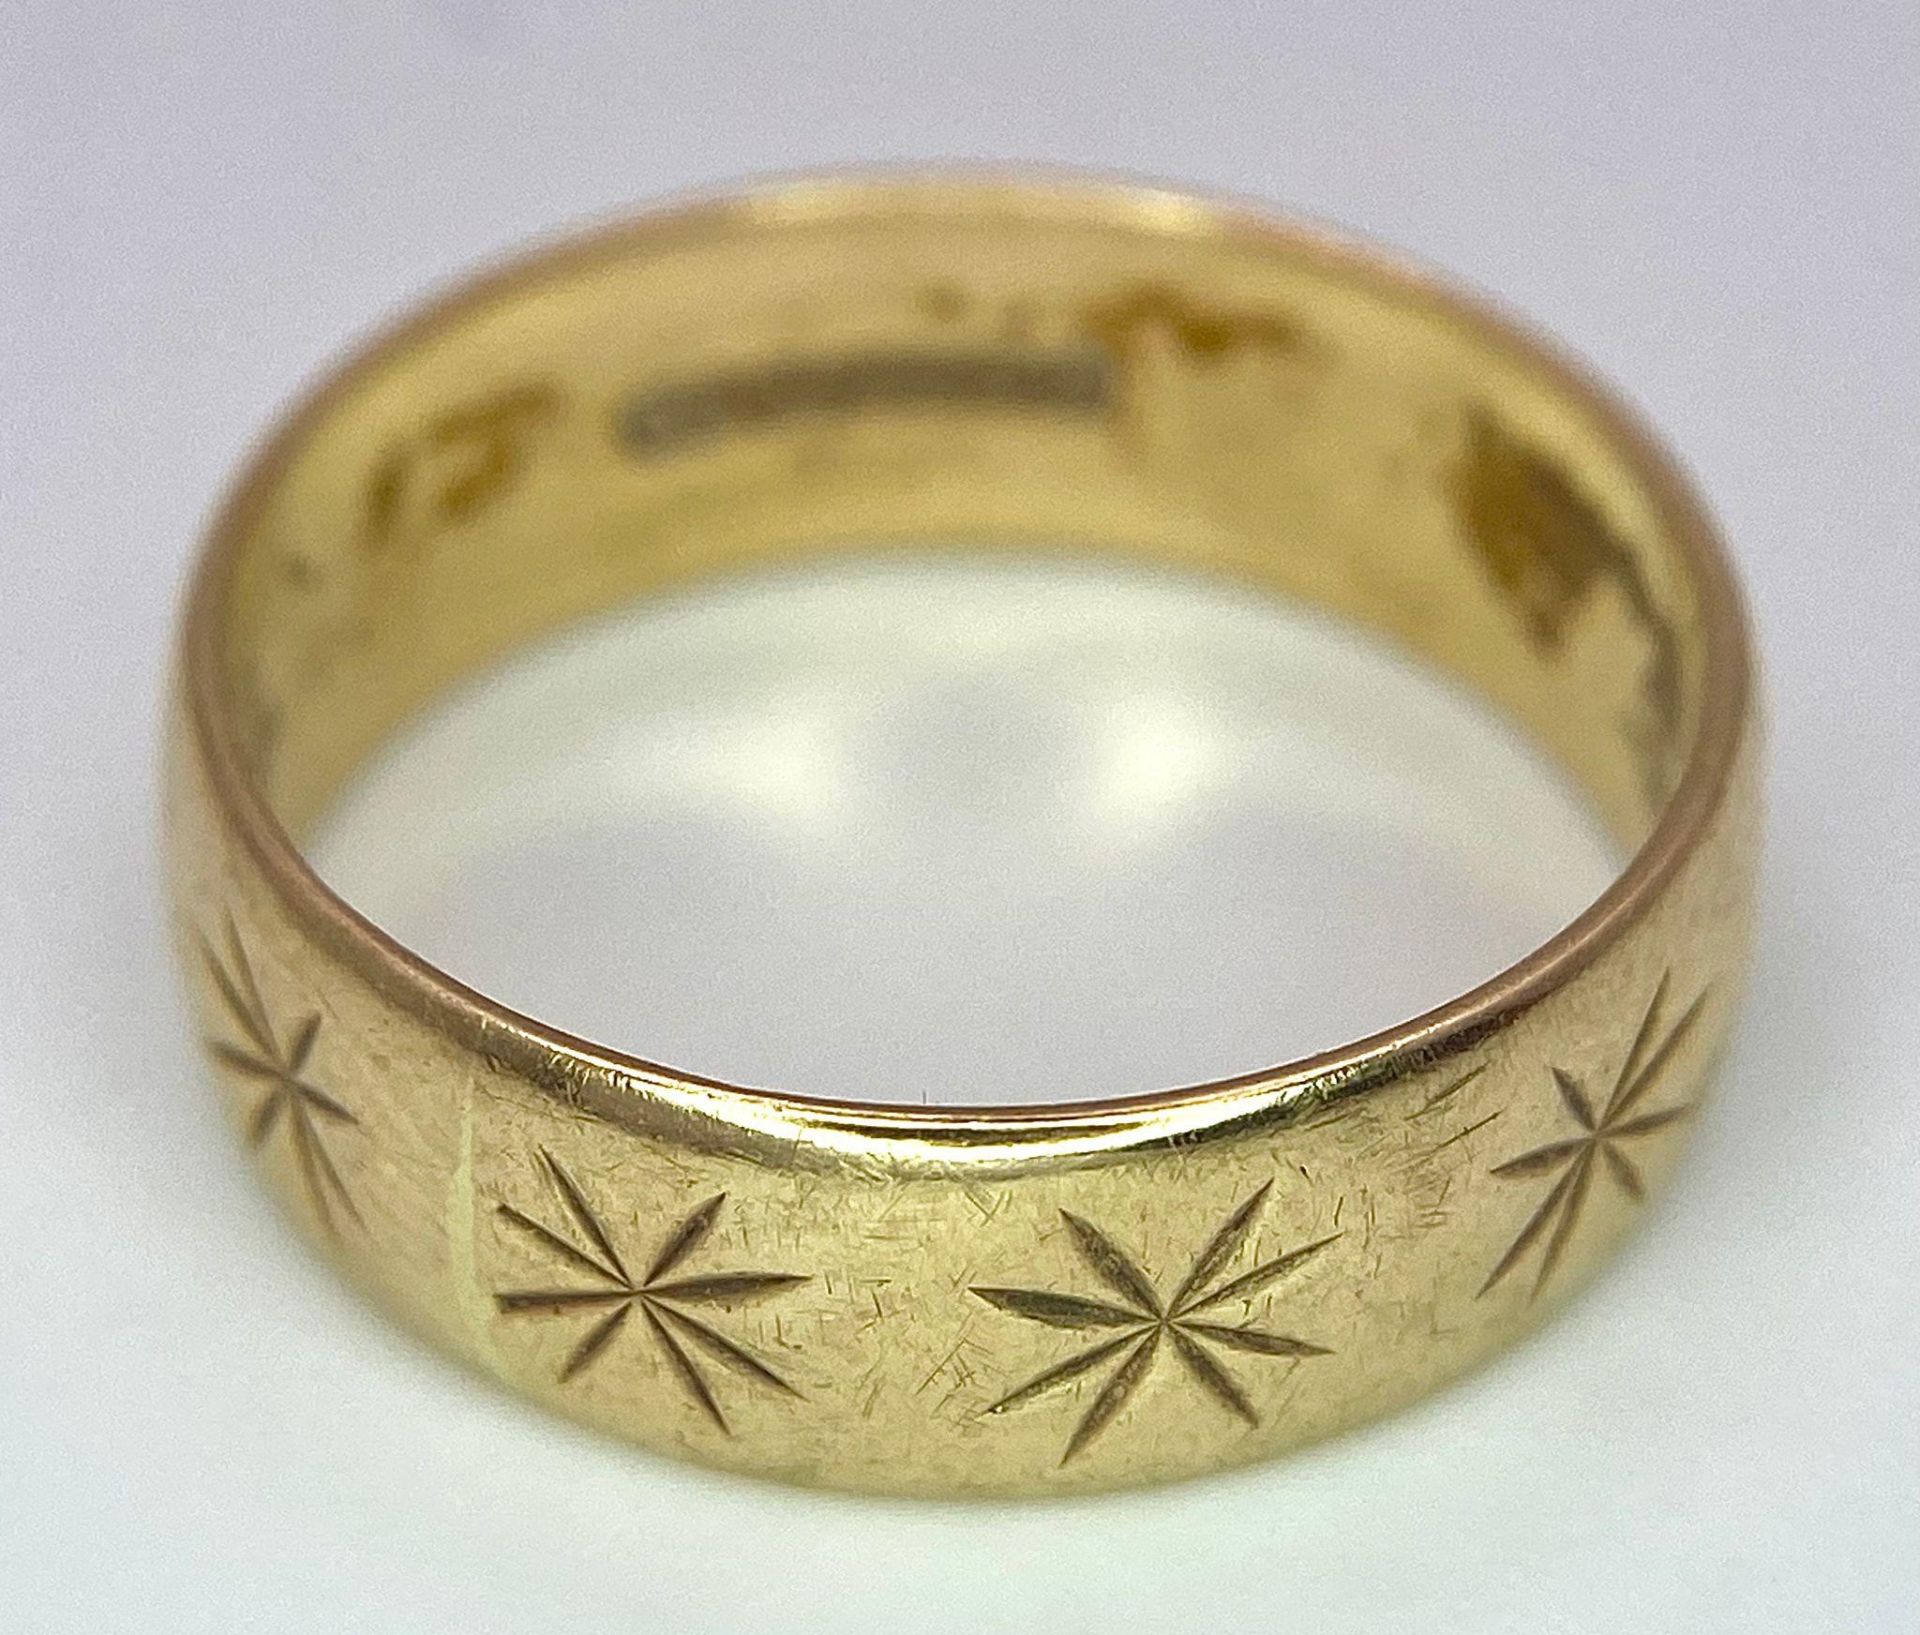 A Vintage 9K Yellow Gold Band Ring with Star Decoration. 5mm width. Size M. 2.8g weight. - Bild 4 aus 6